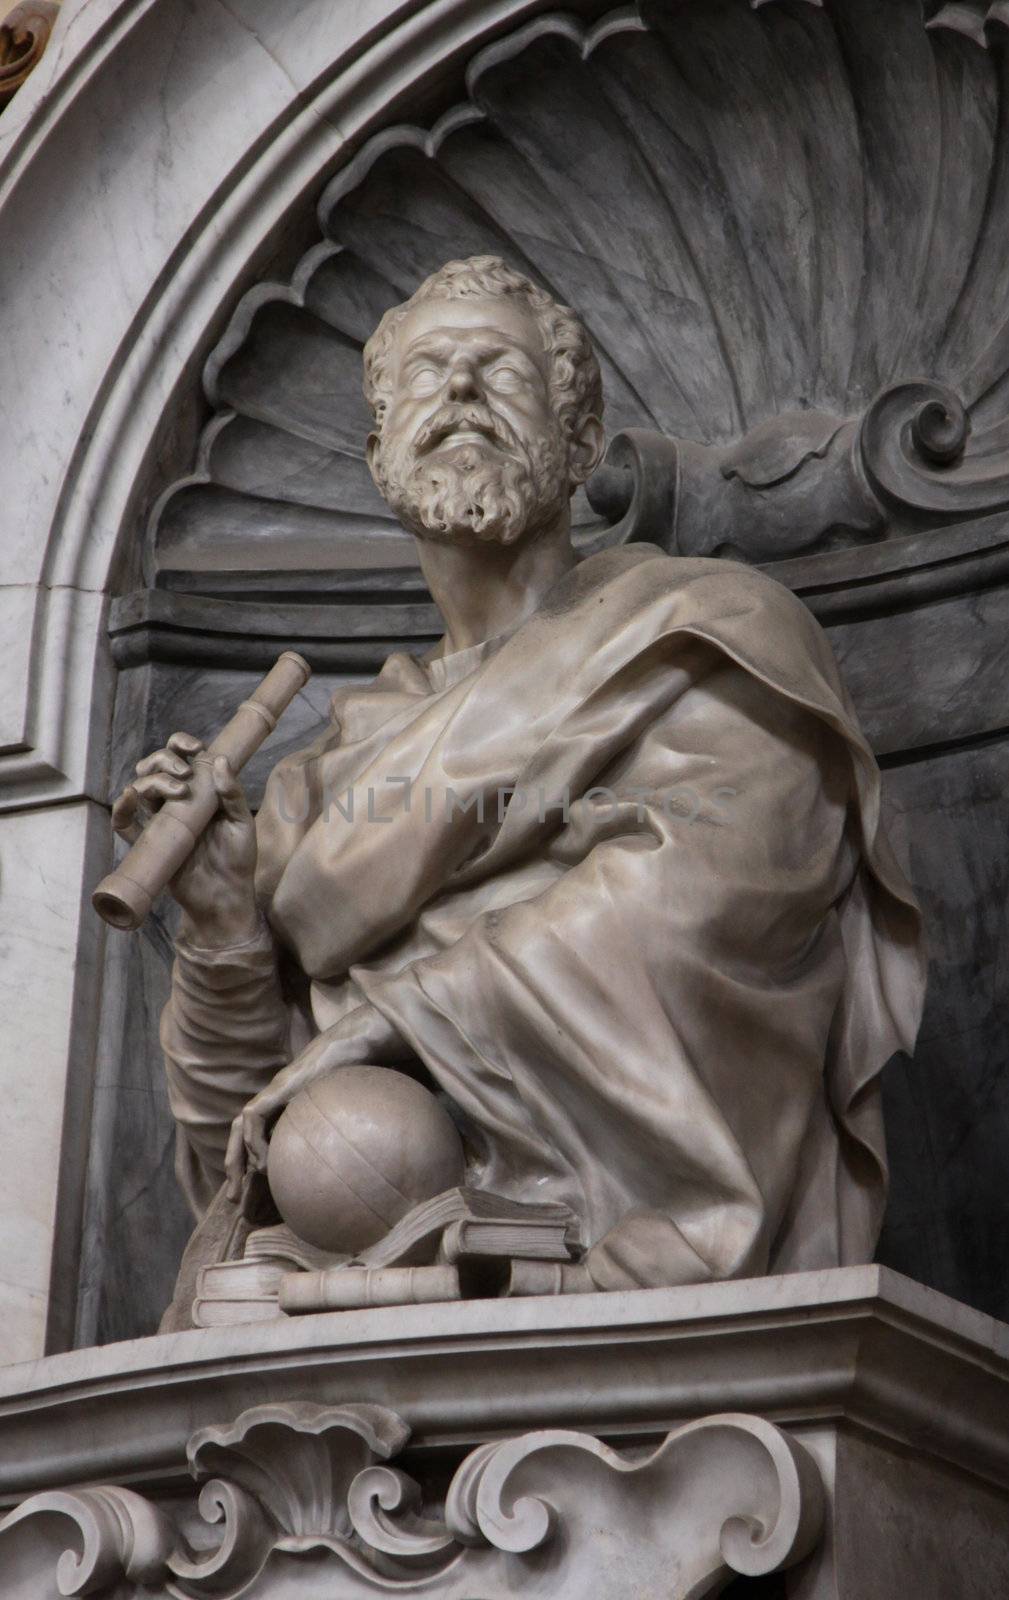 Sculpture of Galileo
 by ca2hill